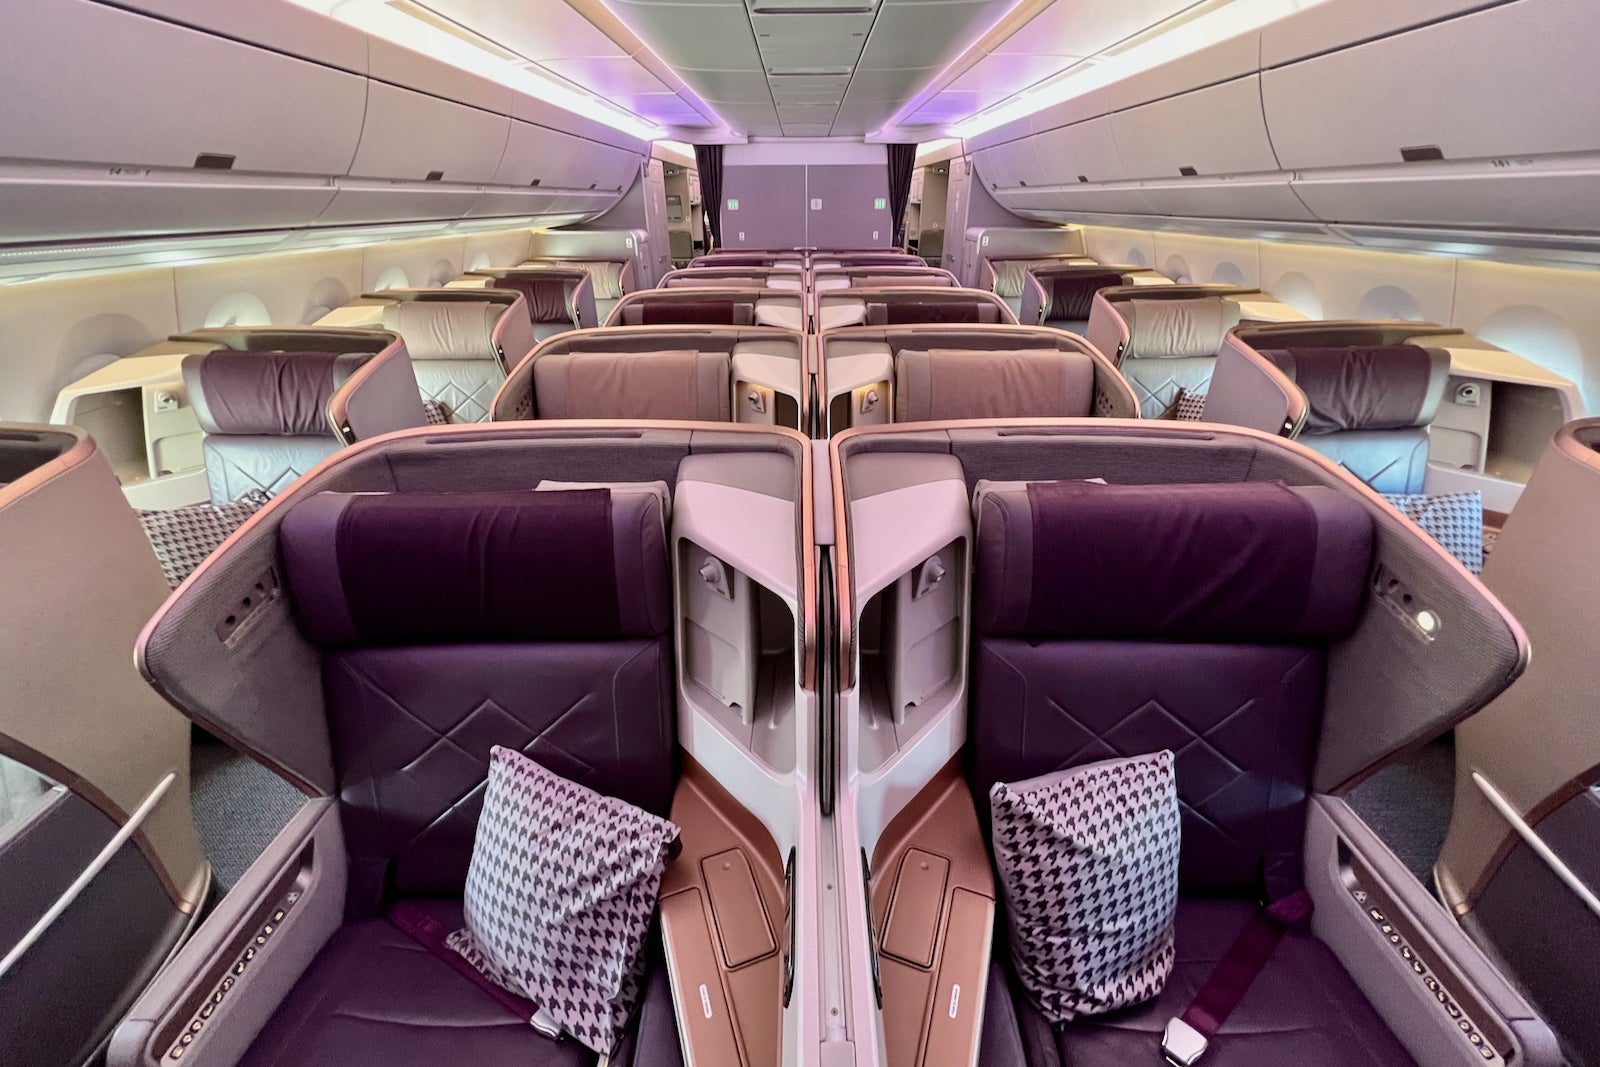 Airlines singapore Singapore Airlines